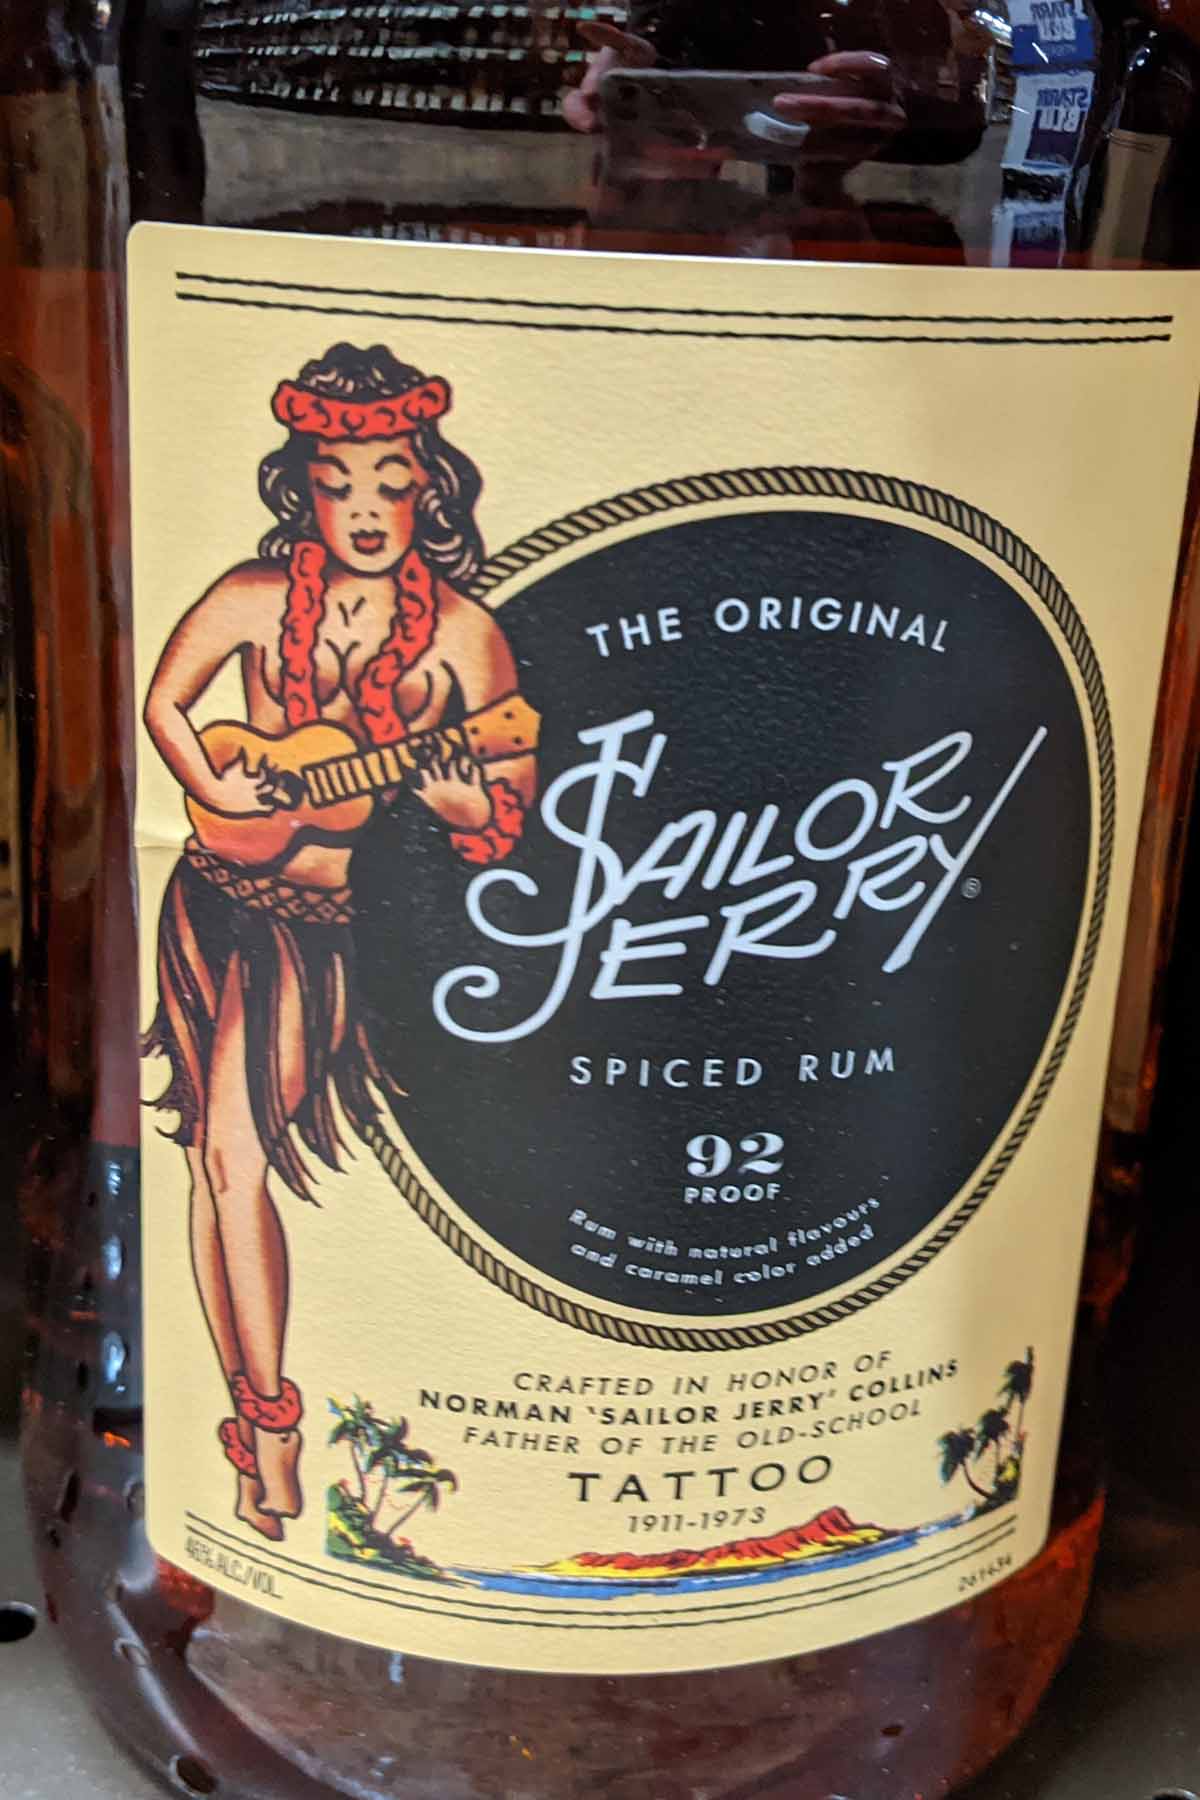 bottle of Sailor Jerry spiced rum.